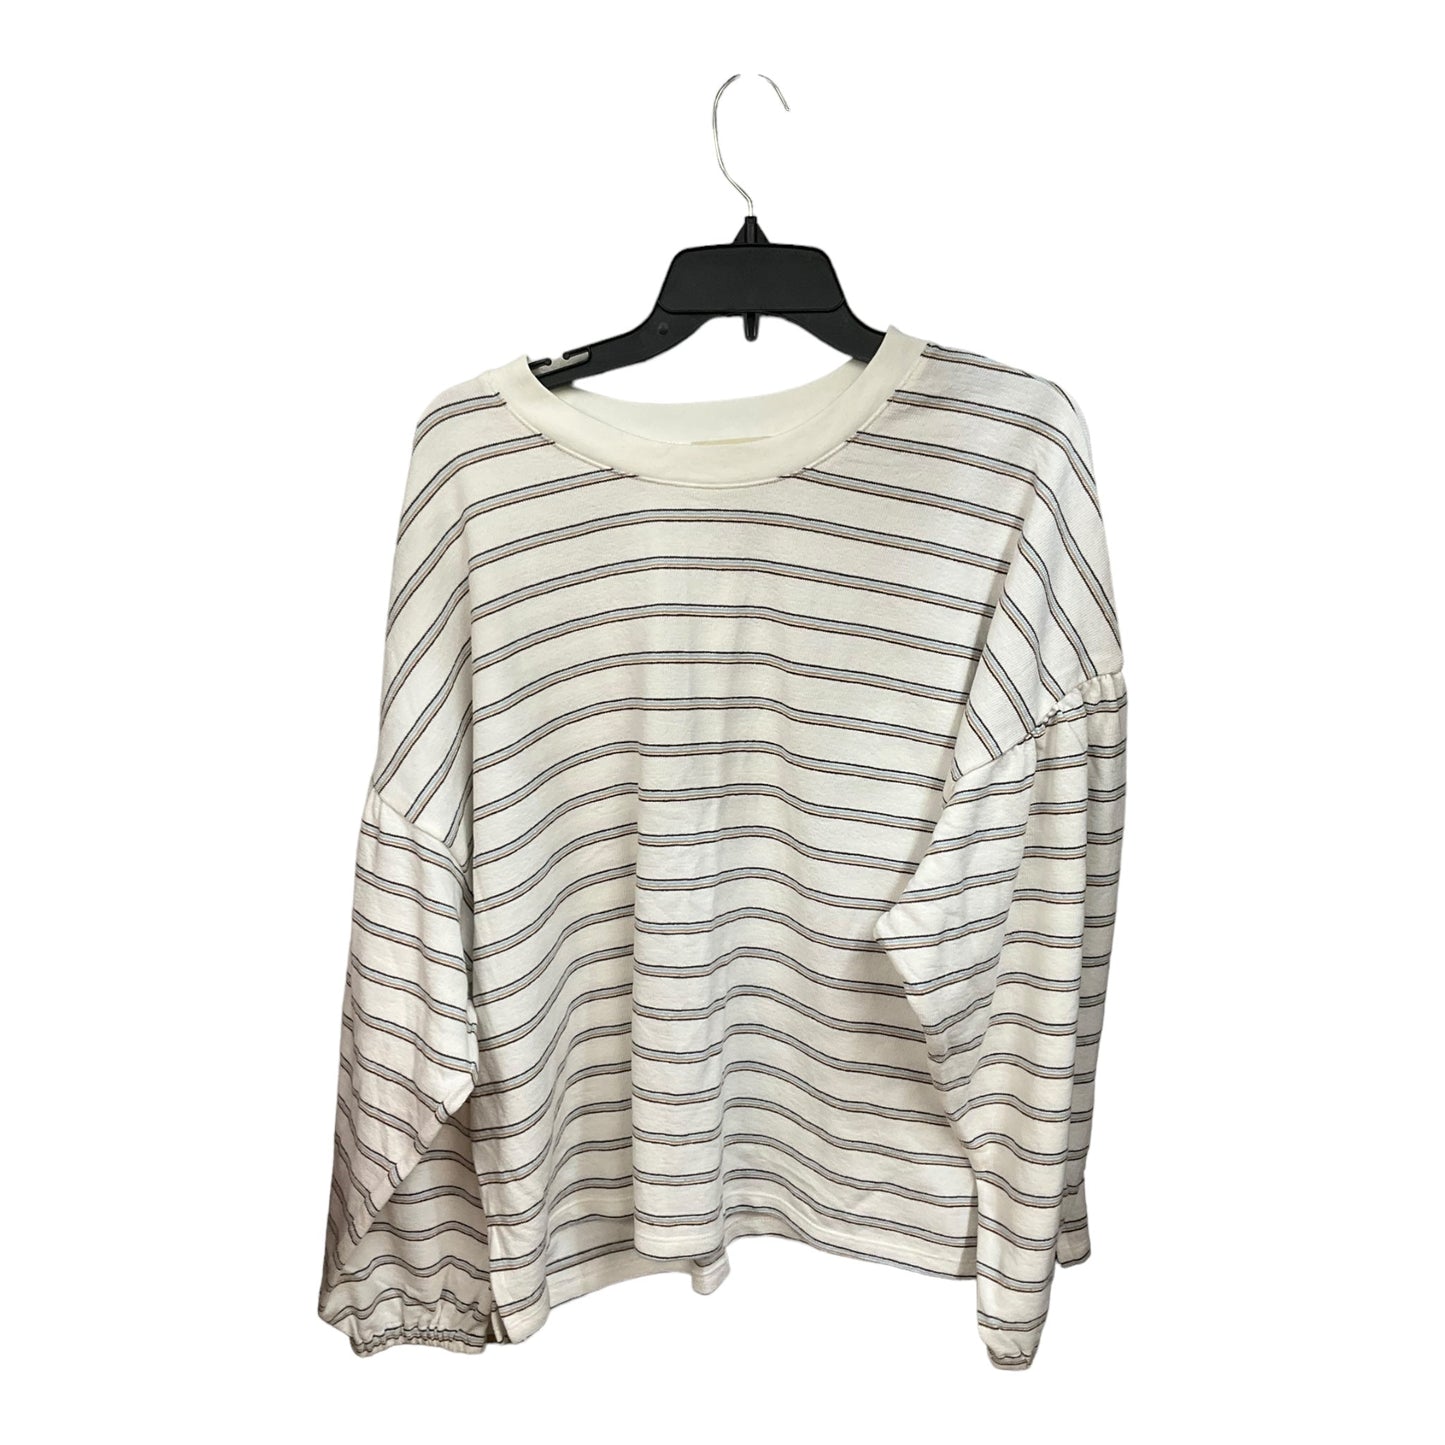 Striped Pattern Top Long Sleeve Madewell, Size Xxl